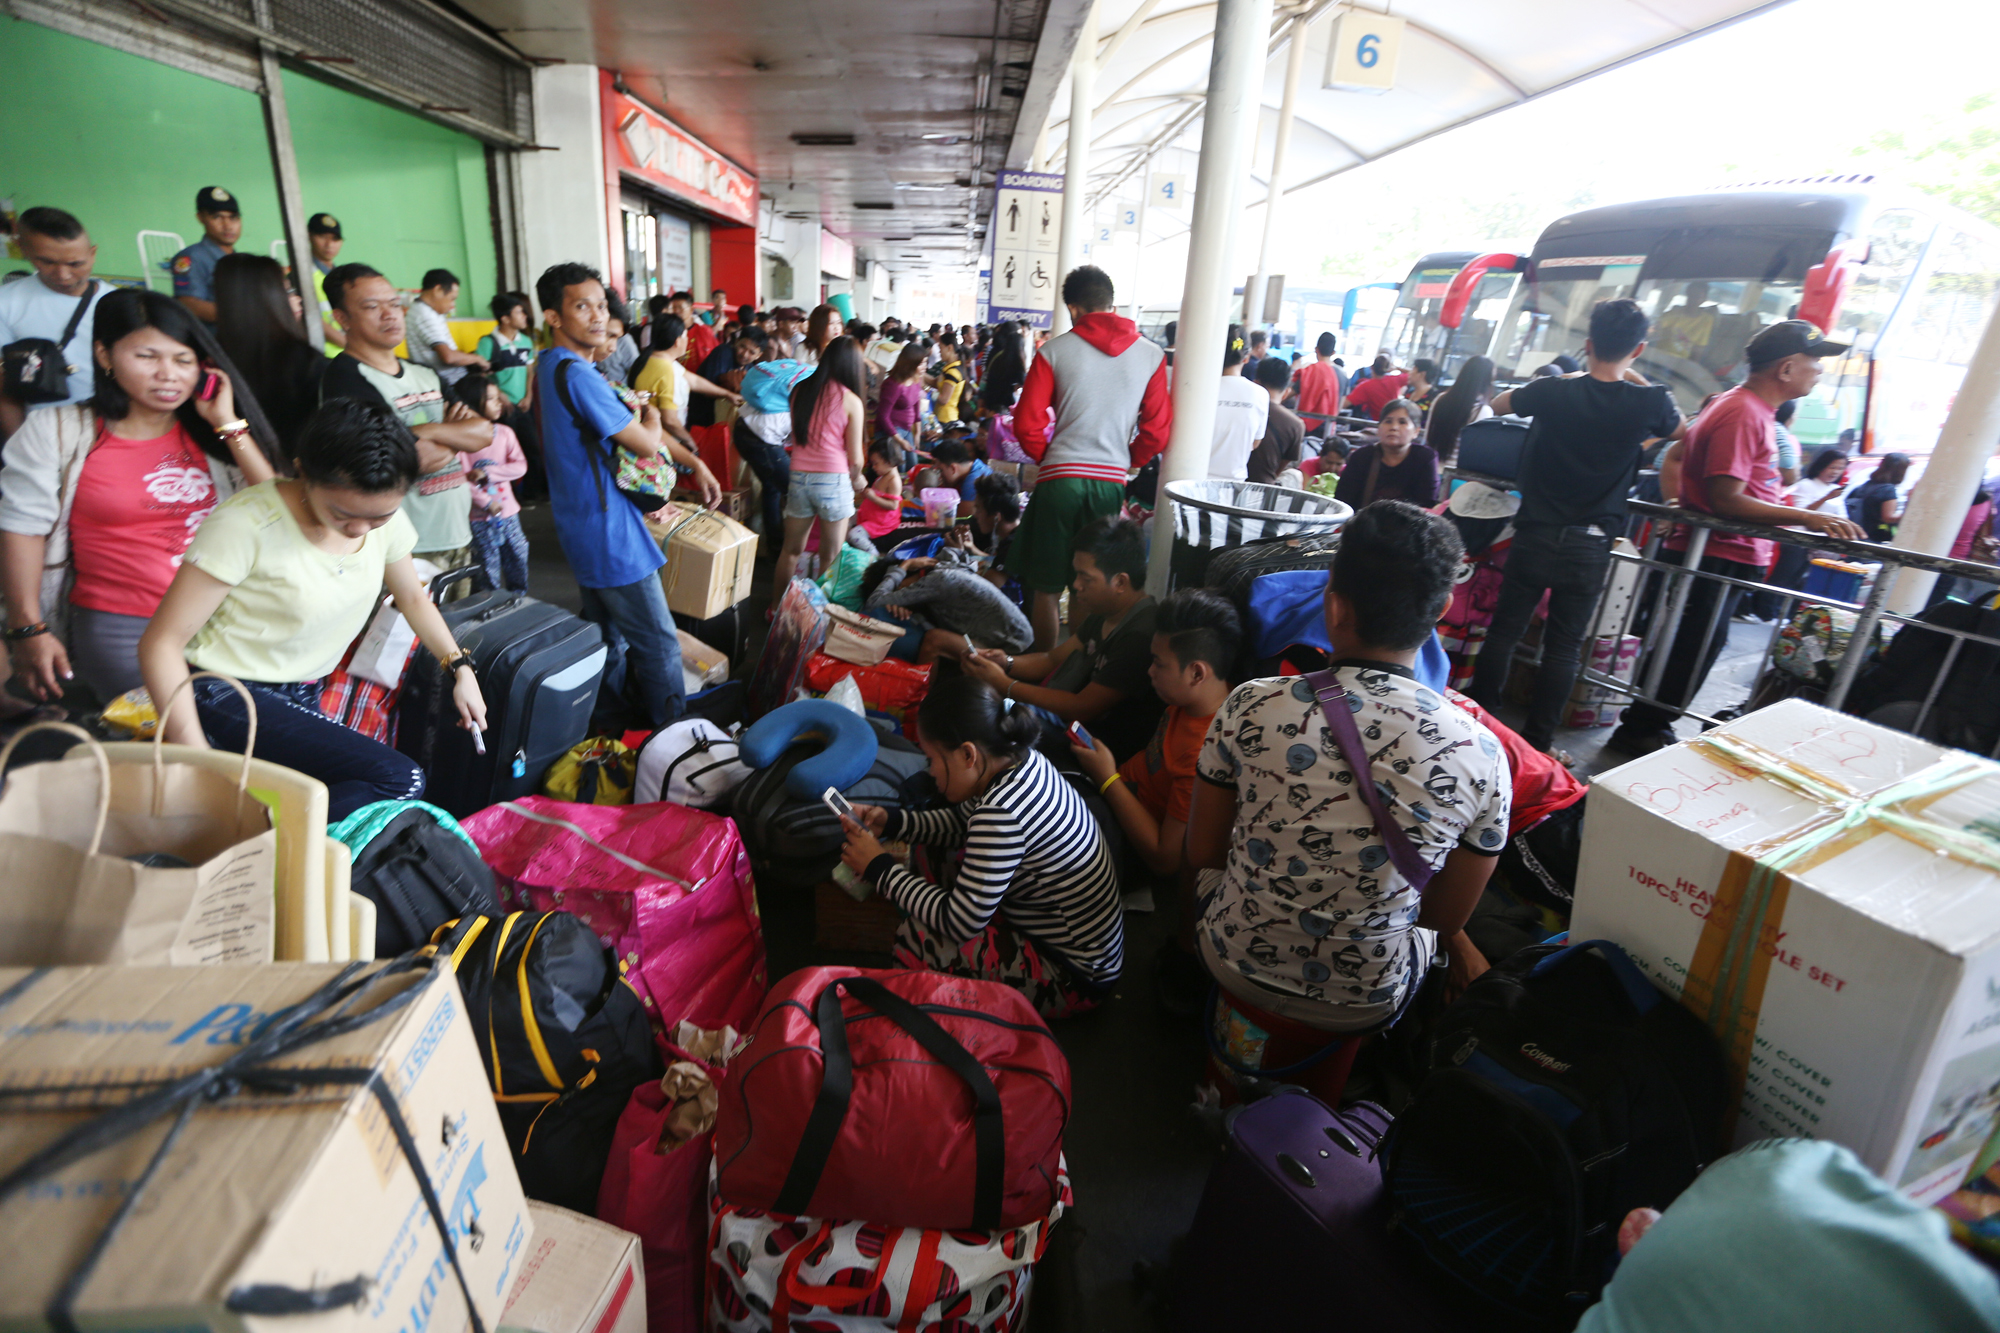 HOLY WEEK BREAK / MARCH 21, 2016 Passengers bound to Bicol and Visayas provinces flock to the Araneta Bus Terminal in Quezon City, March 21, 2016, to take the early trip. Many Filipinos head to the provinces for a vacation during Holy Week to take advantage of the holidays.  INQUIRER PHOTO / NINO JESUS ORBETA